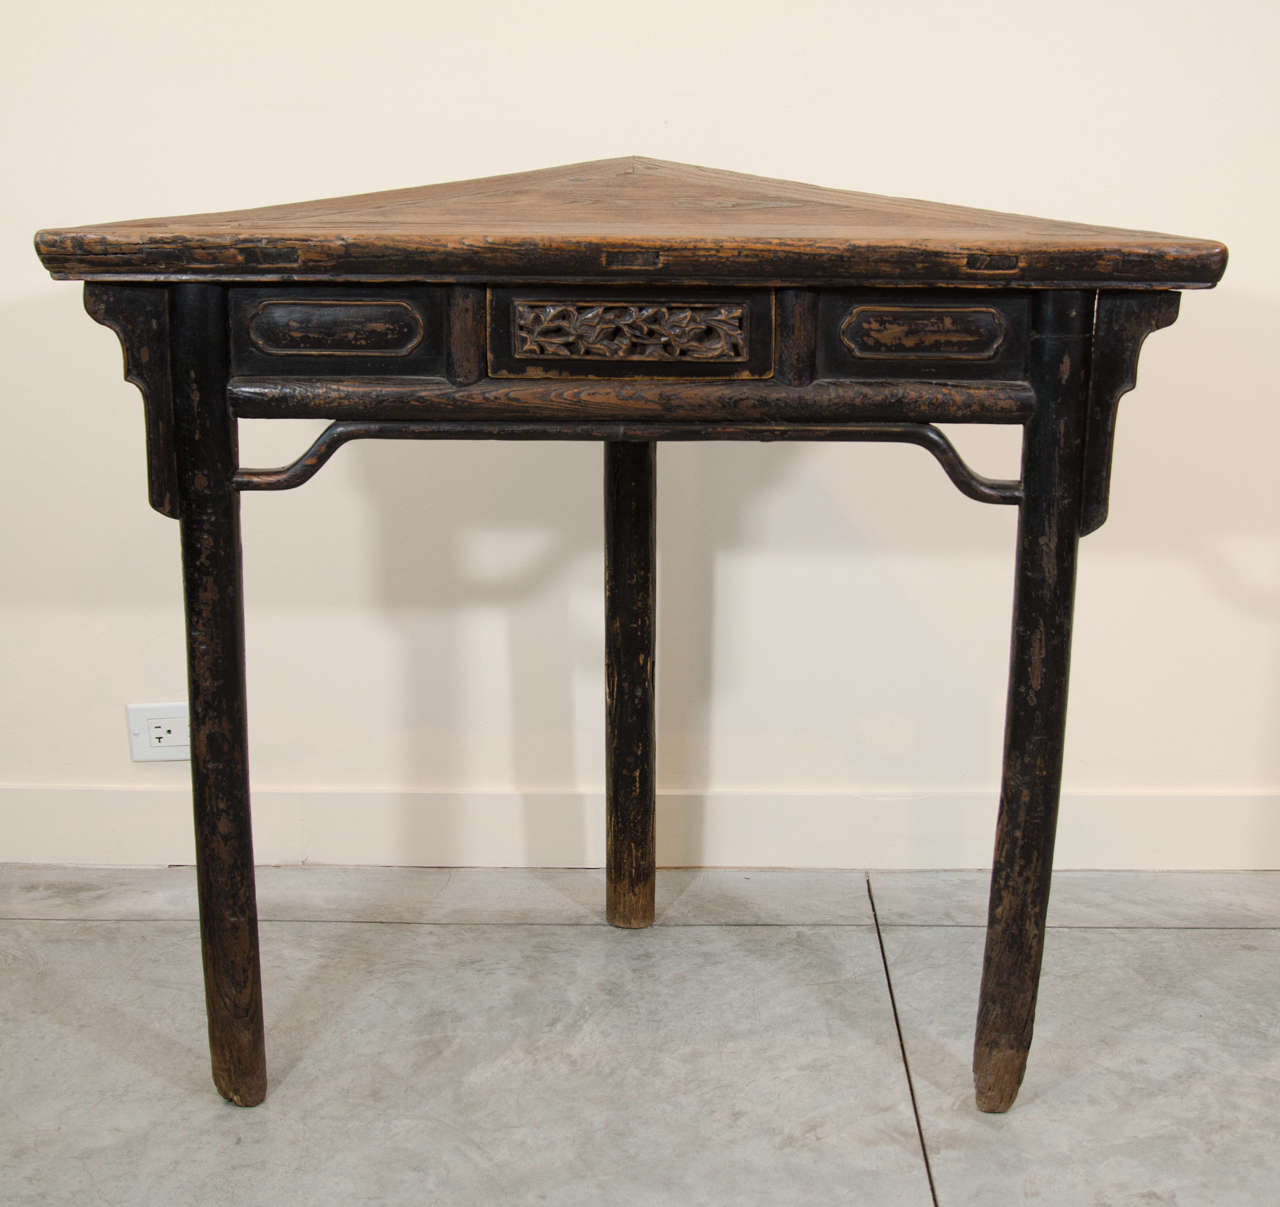 An unusual Chinese corner table, circa 1850, from Shanxi Province. With beautifully carved drawer and fine patina.

Dimensions: 
Front - left to right : 39